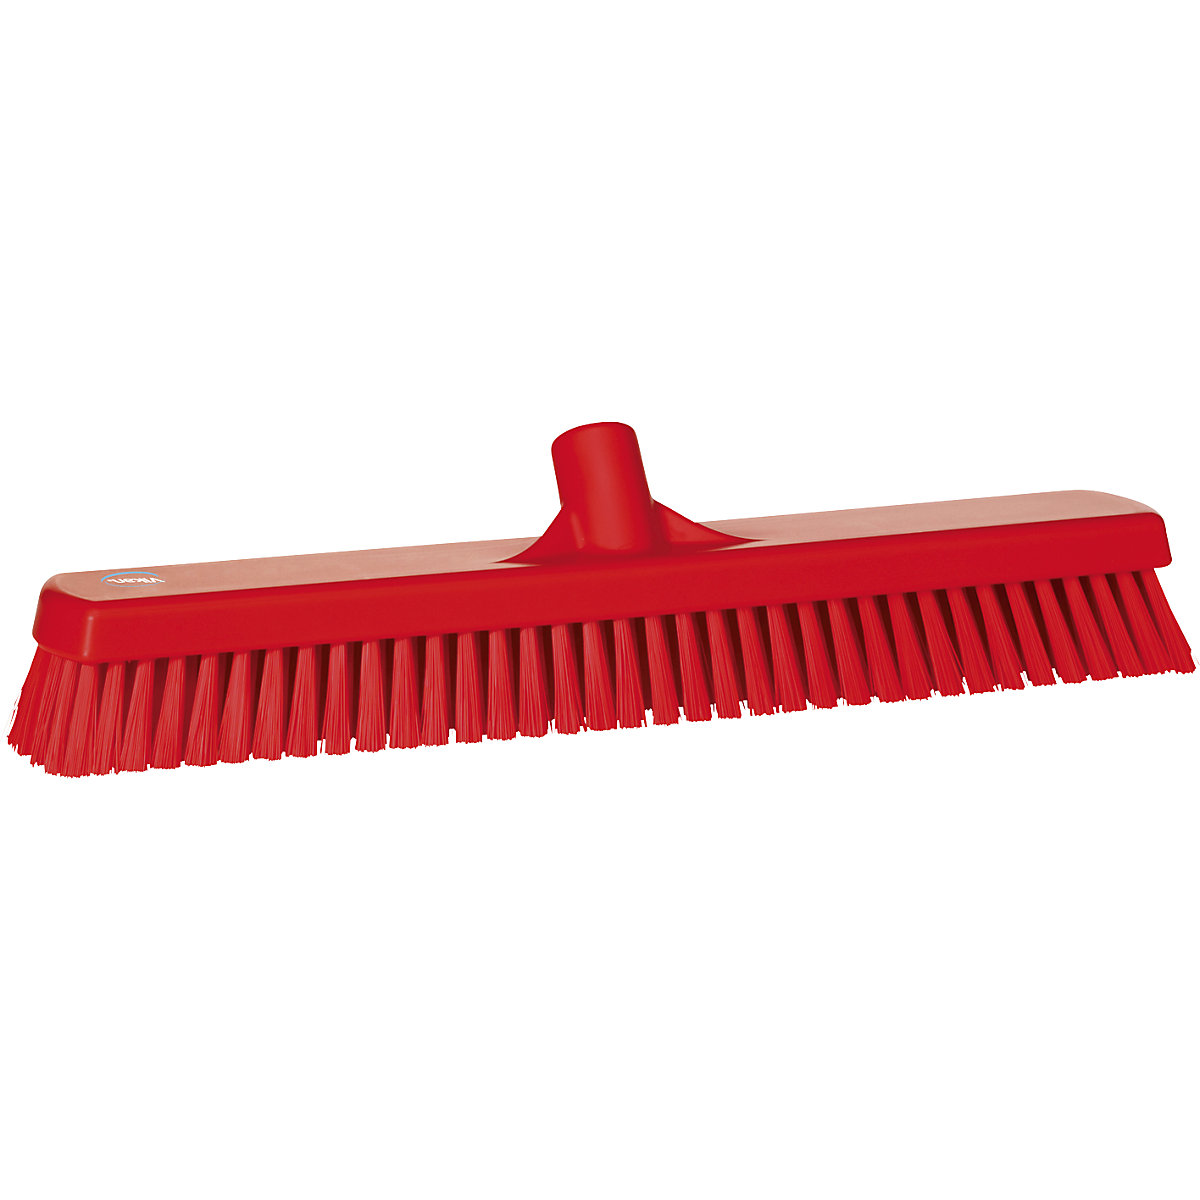 Vikan – Wall/floor scrubber, hard, pack of 8, red